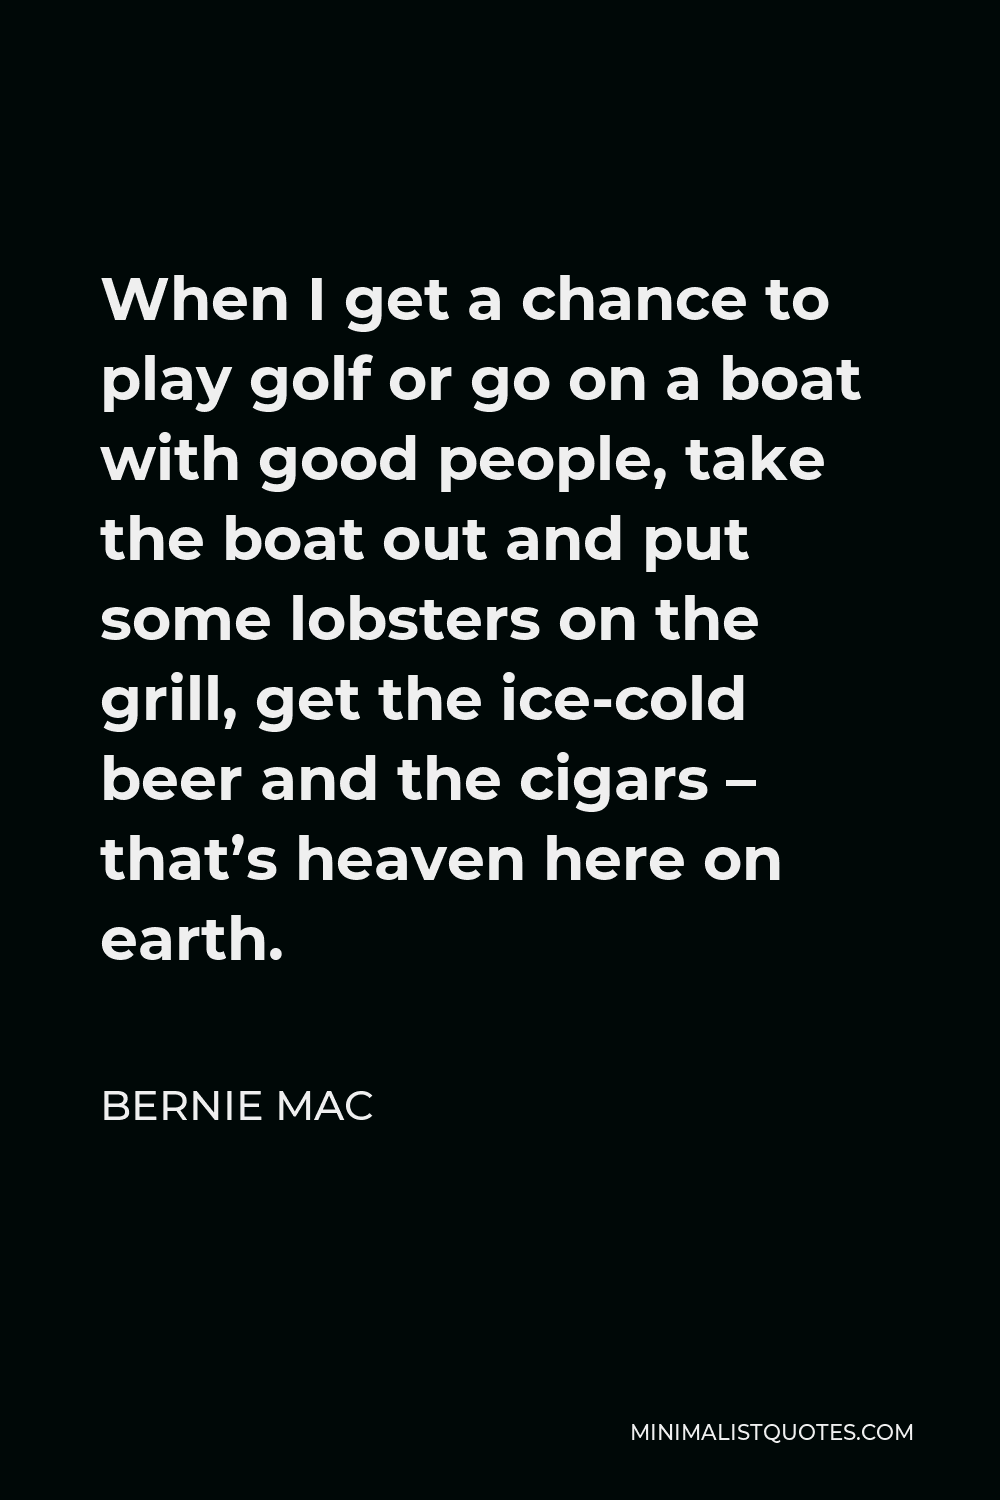 Bernie Mac Quote - When I get a chance to play golf or go on a boat with good people, take the boat out and put some lobsters on the grill, get the ice-cold beer and the cigars – that’s heaven here on earth.